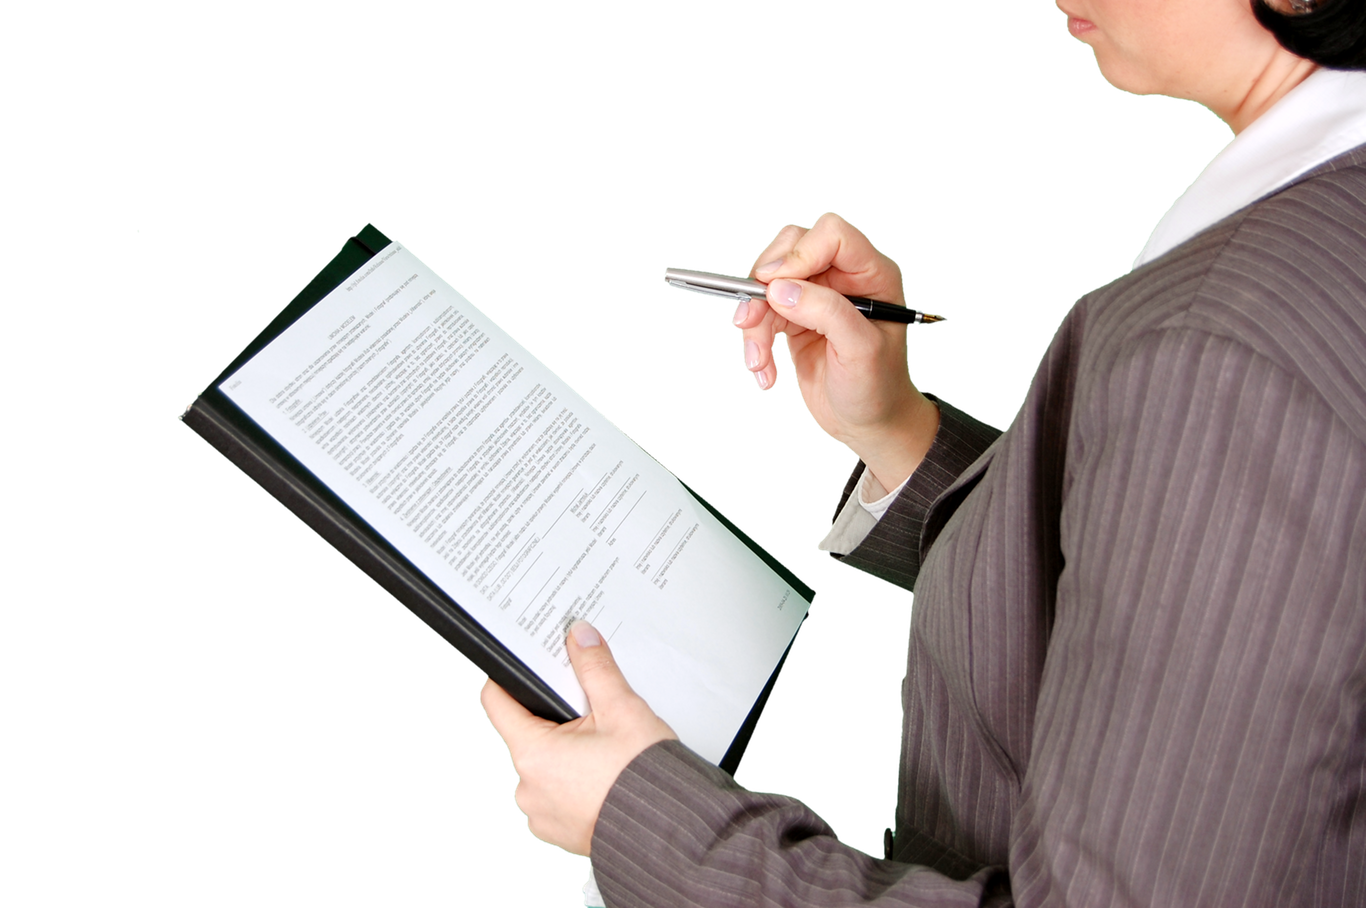 Woman in a suit with pen in hand reads a furniture financing contract